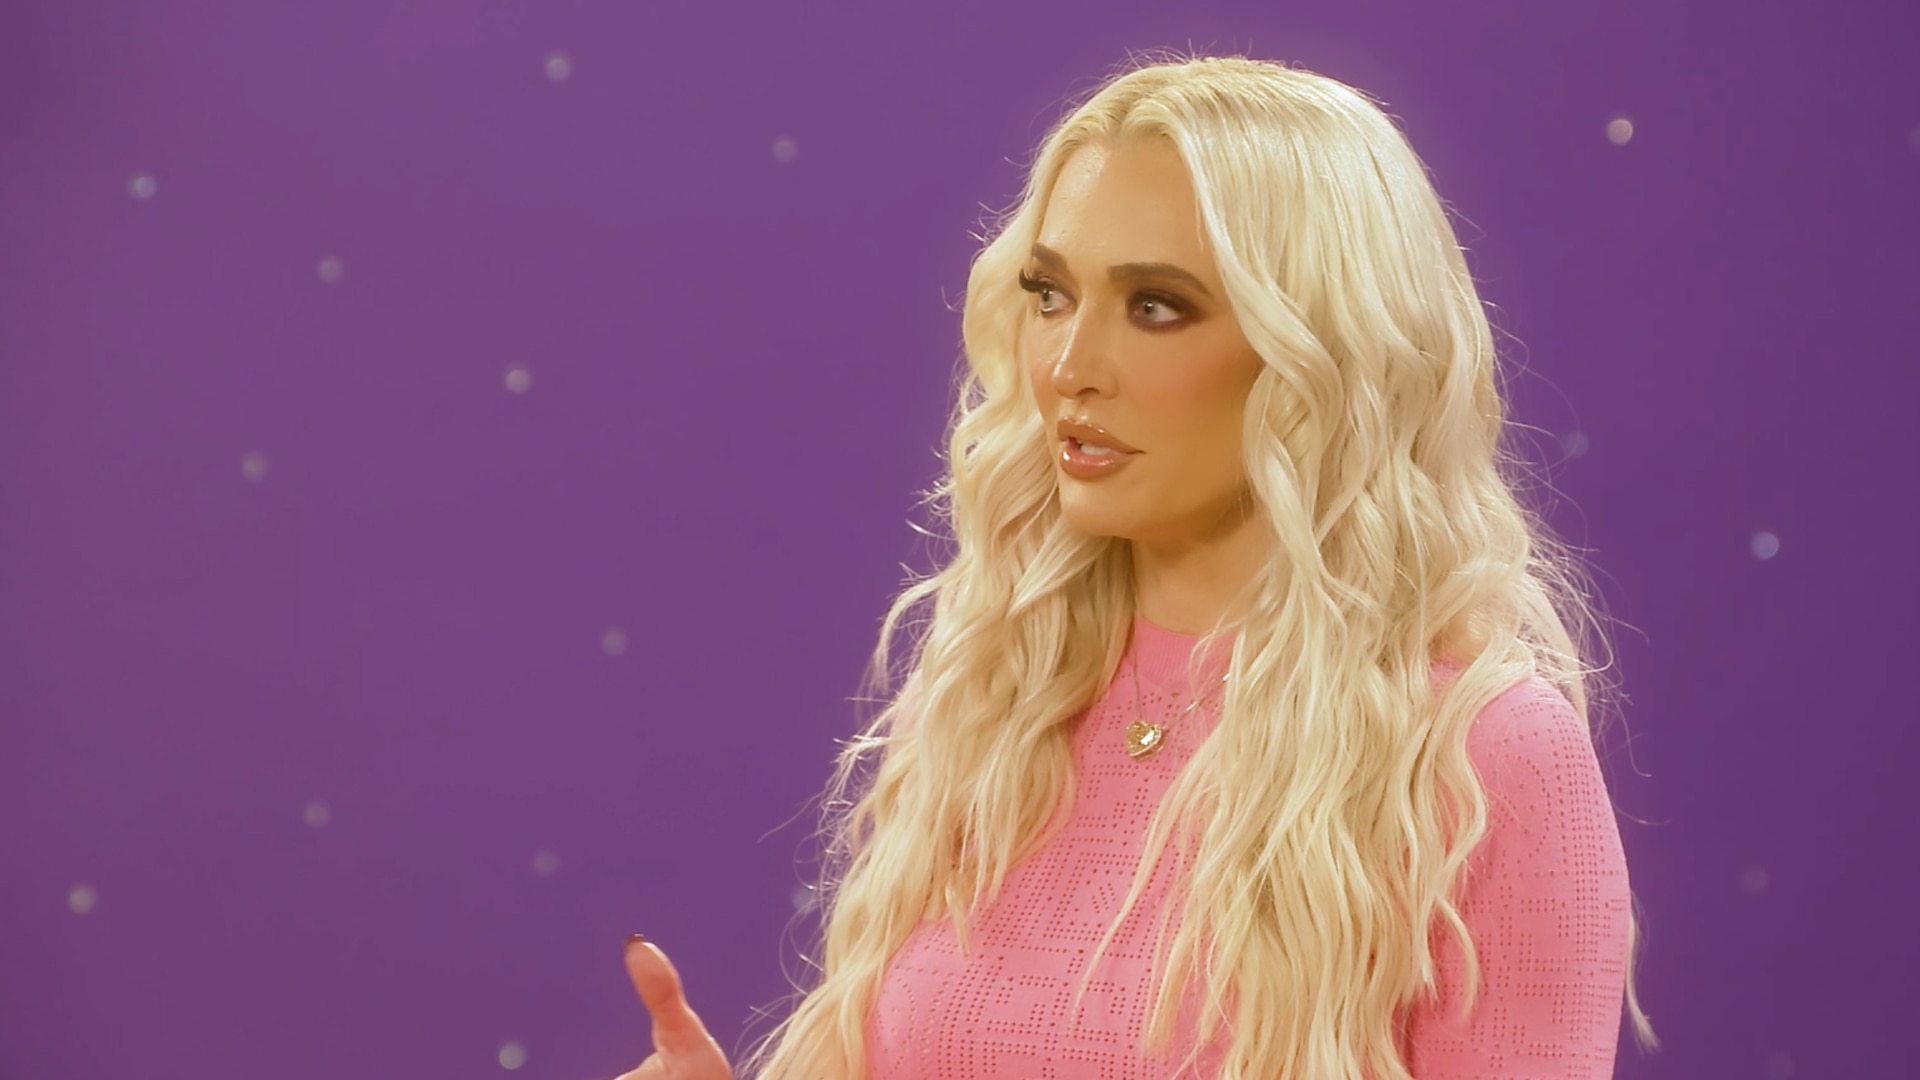 Erika Jayne Opens Up About Experiencing Hardships While on TV